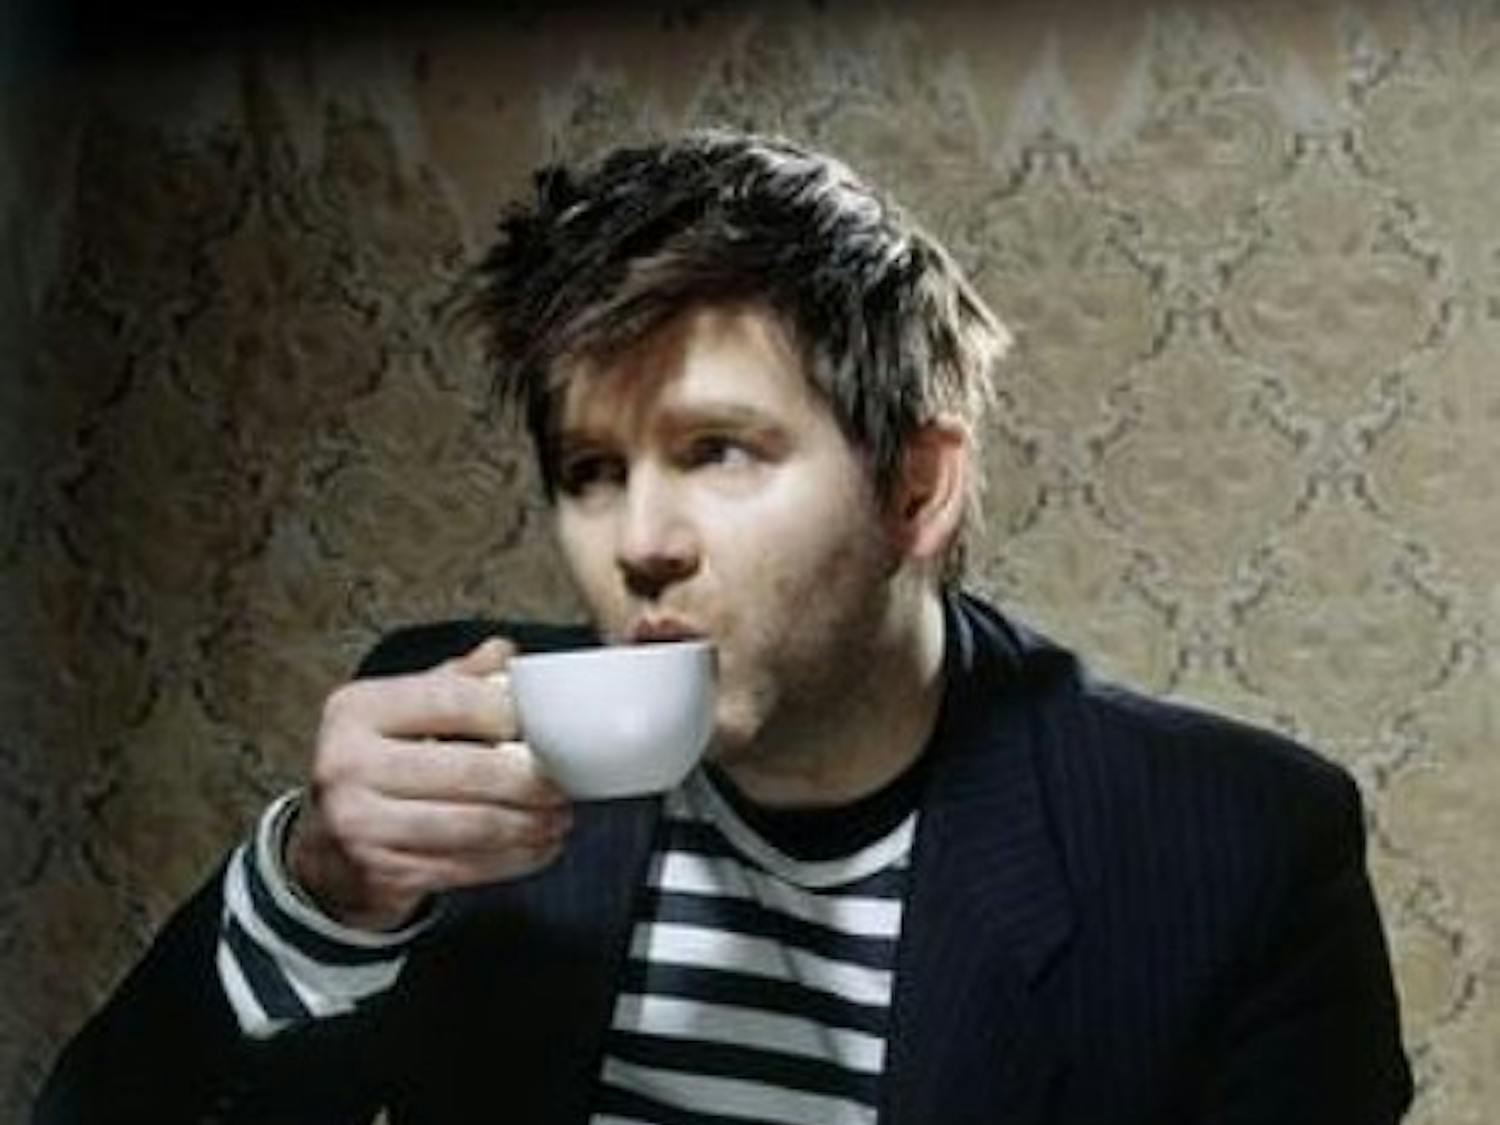 James Murphy, the man behind the band LCD Soundsystem, has balanced his music career between embracing and debasing the hipster lifestyle.